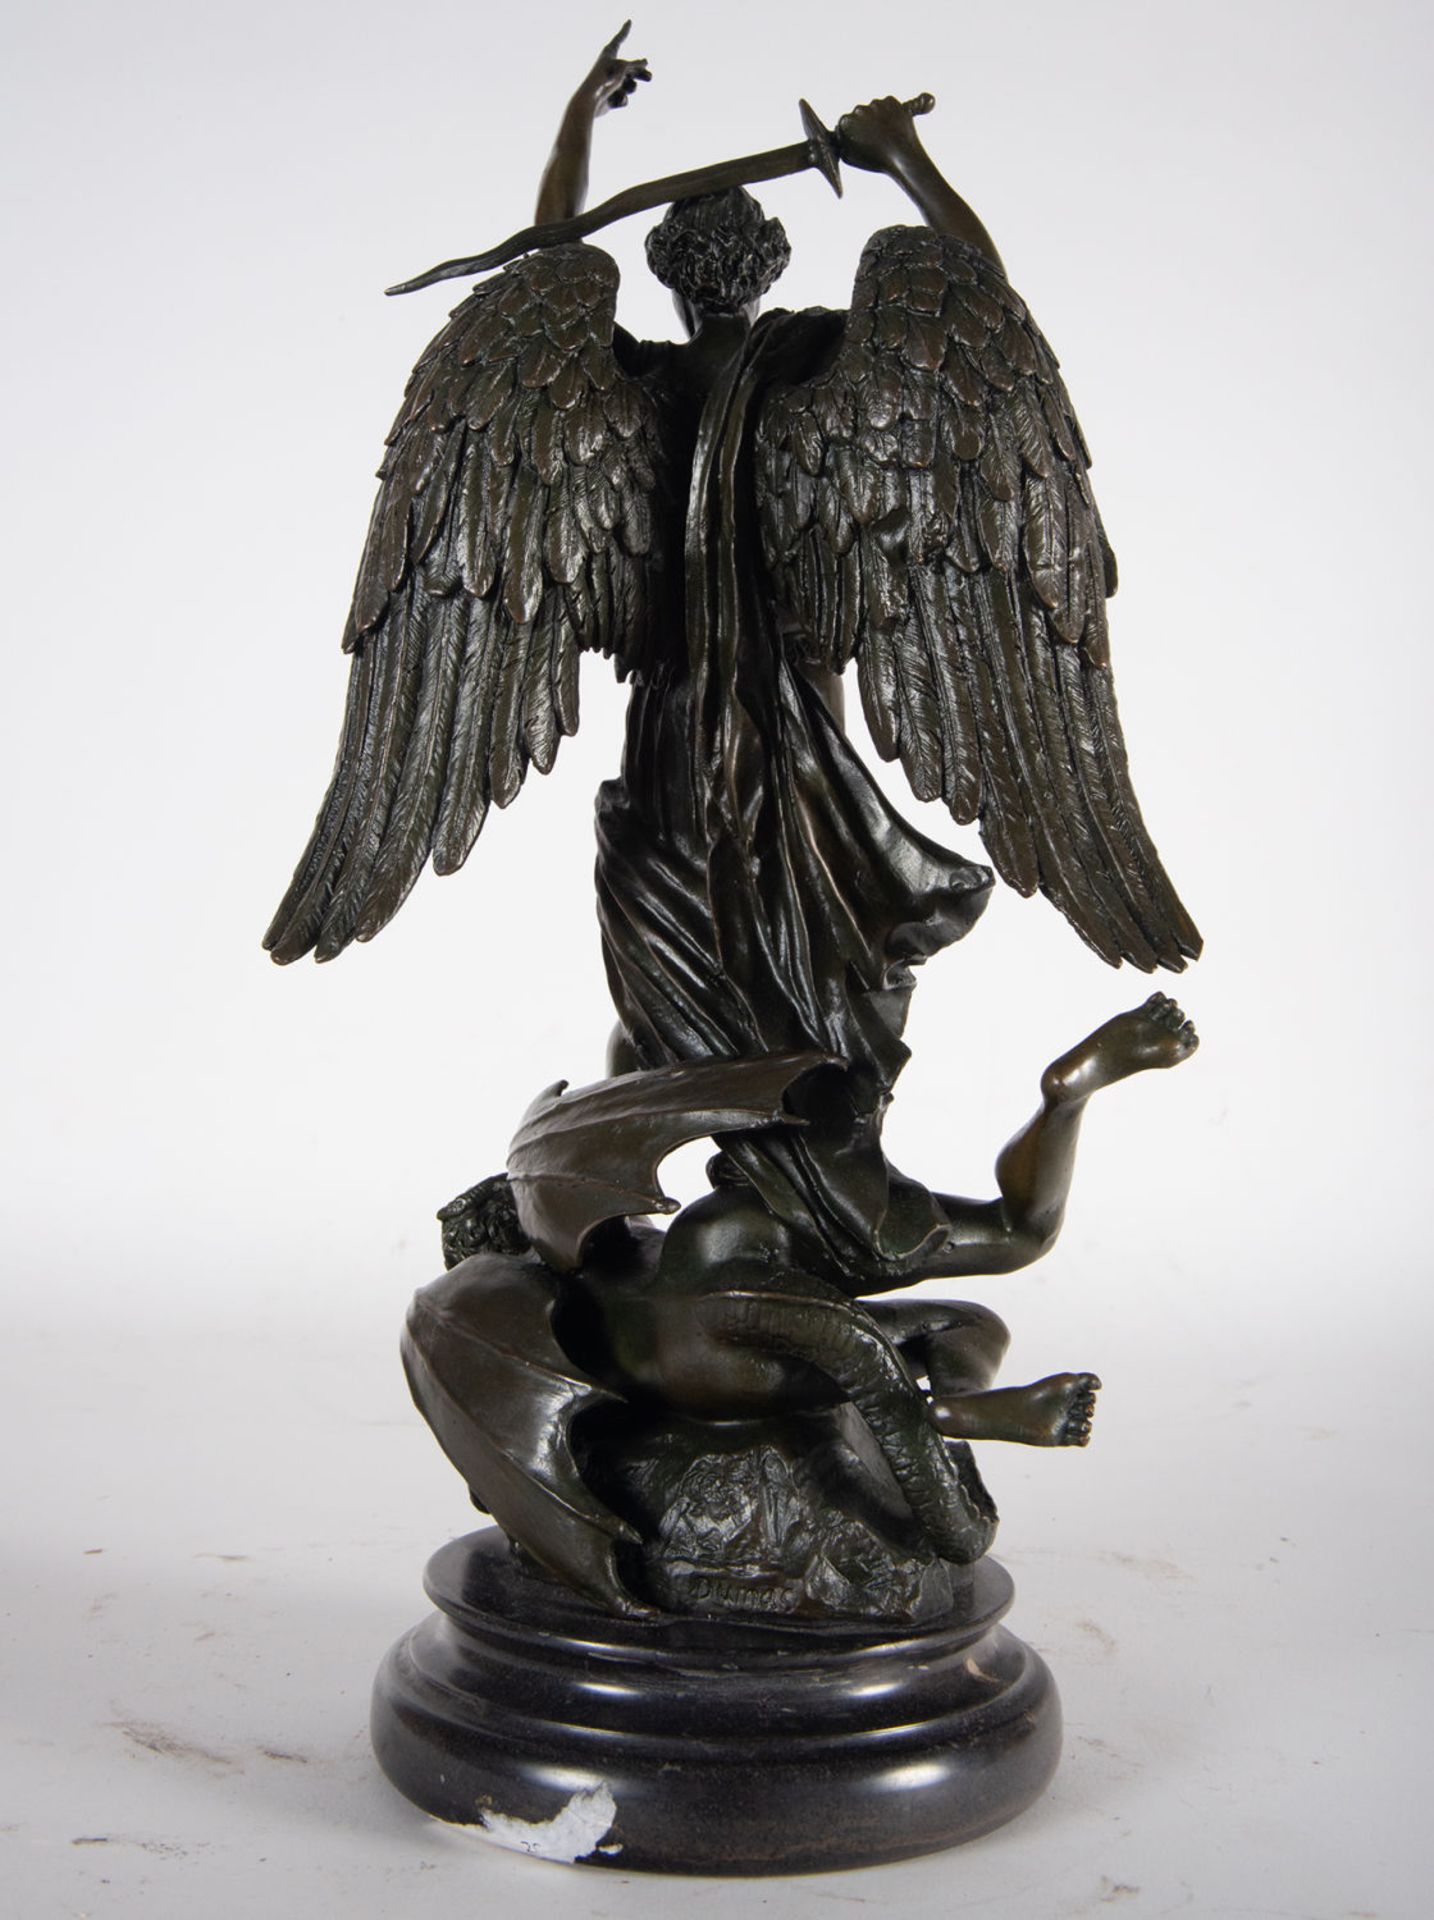 Saint Michael the Archangel Defeating the Evil One in patinated bronze, XIX - XX Centuries - Image 6 of 6